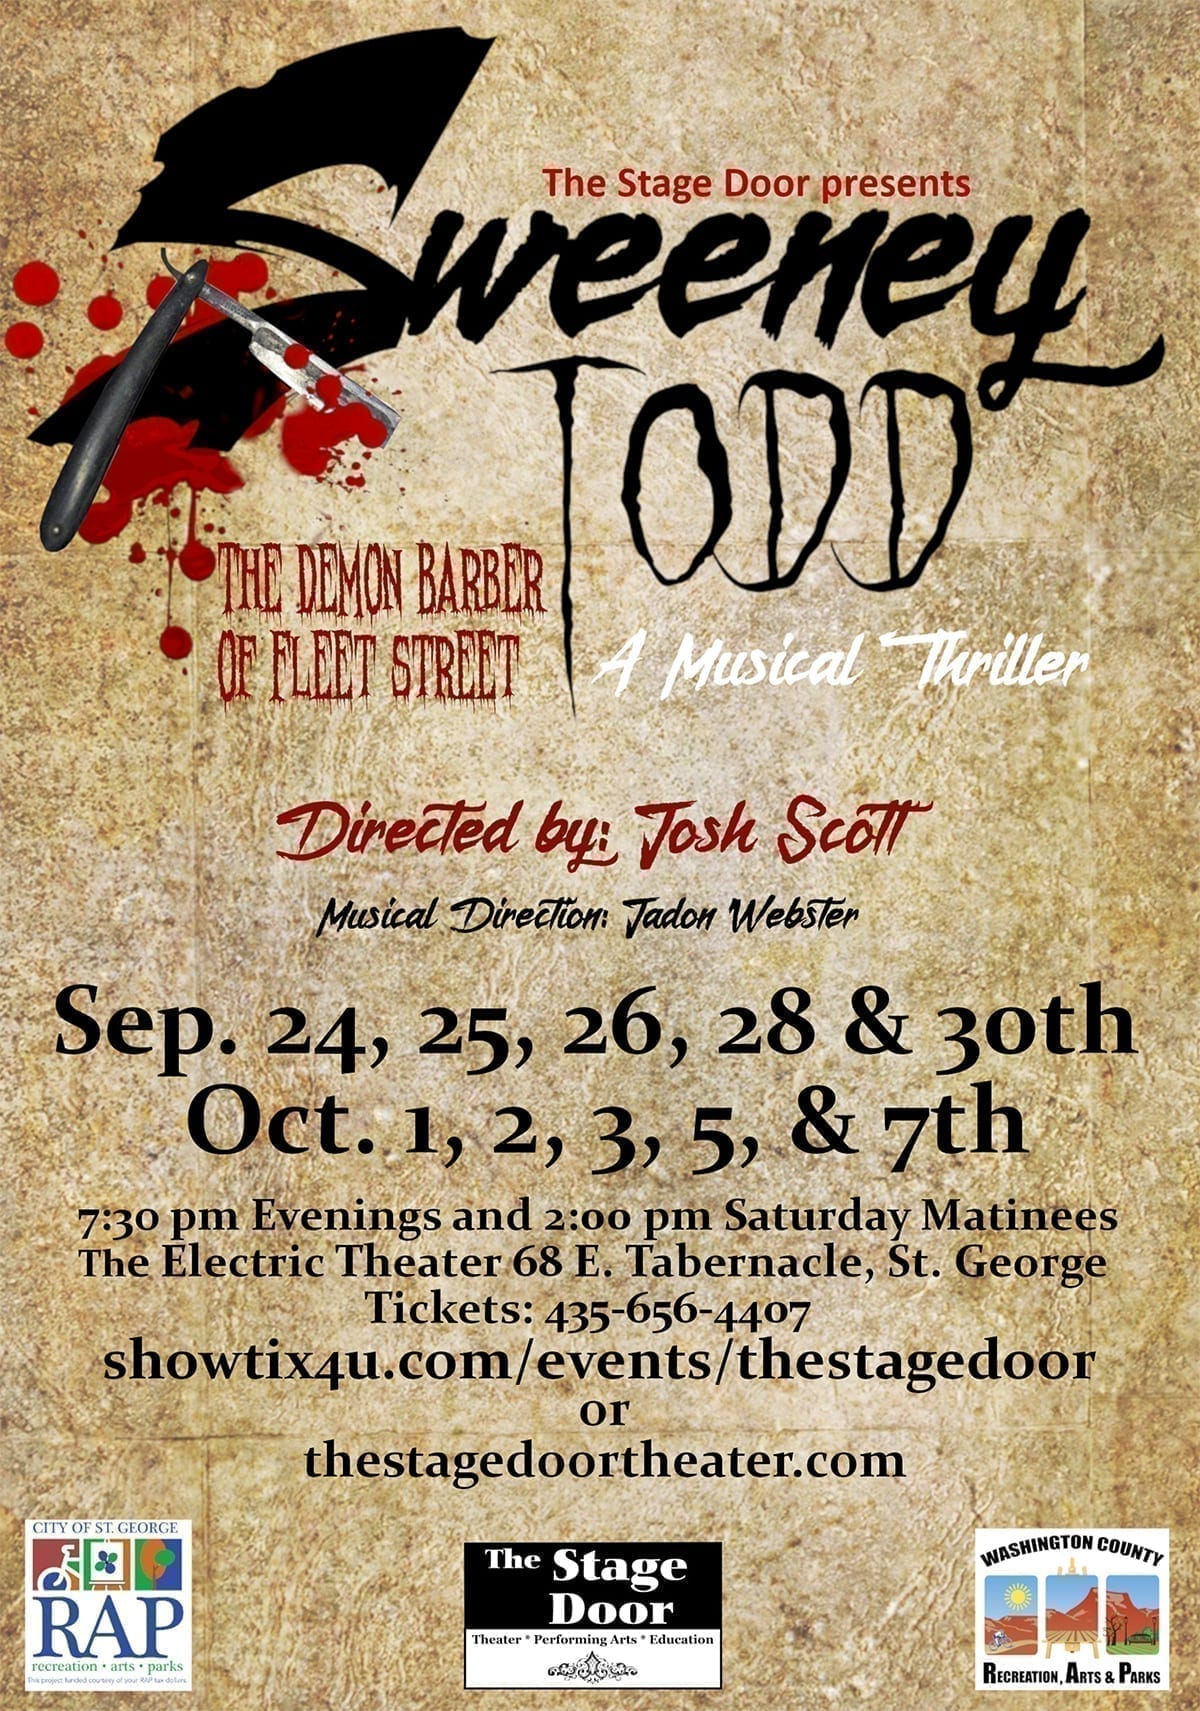 Win Tickets To See Sweeney Todd